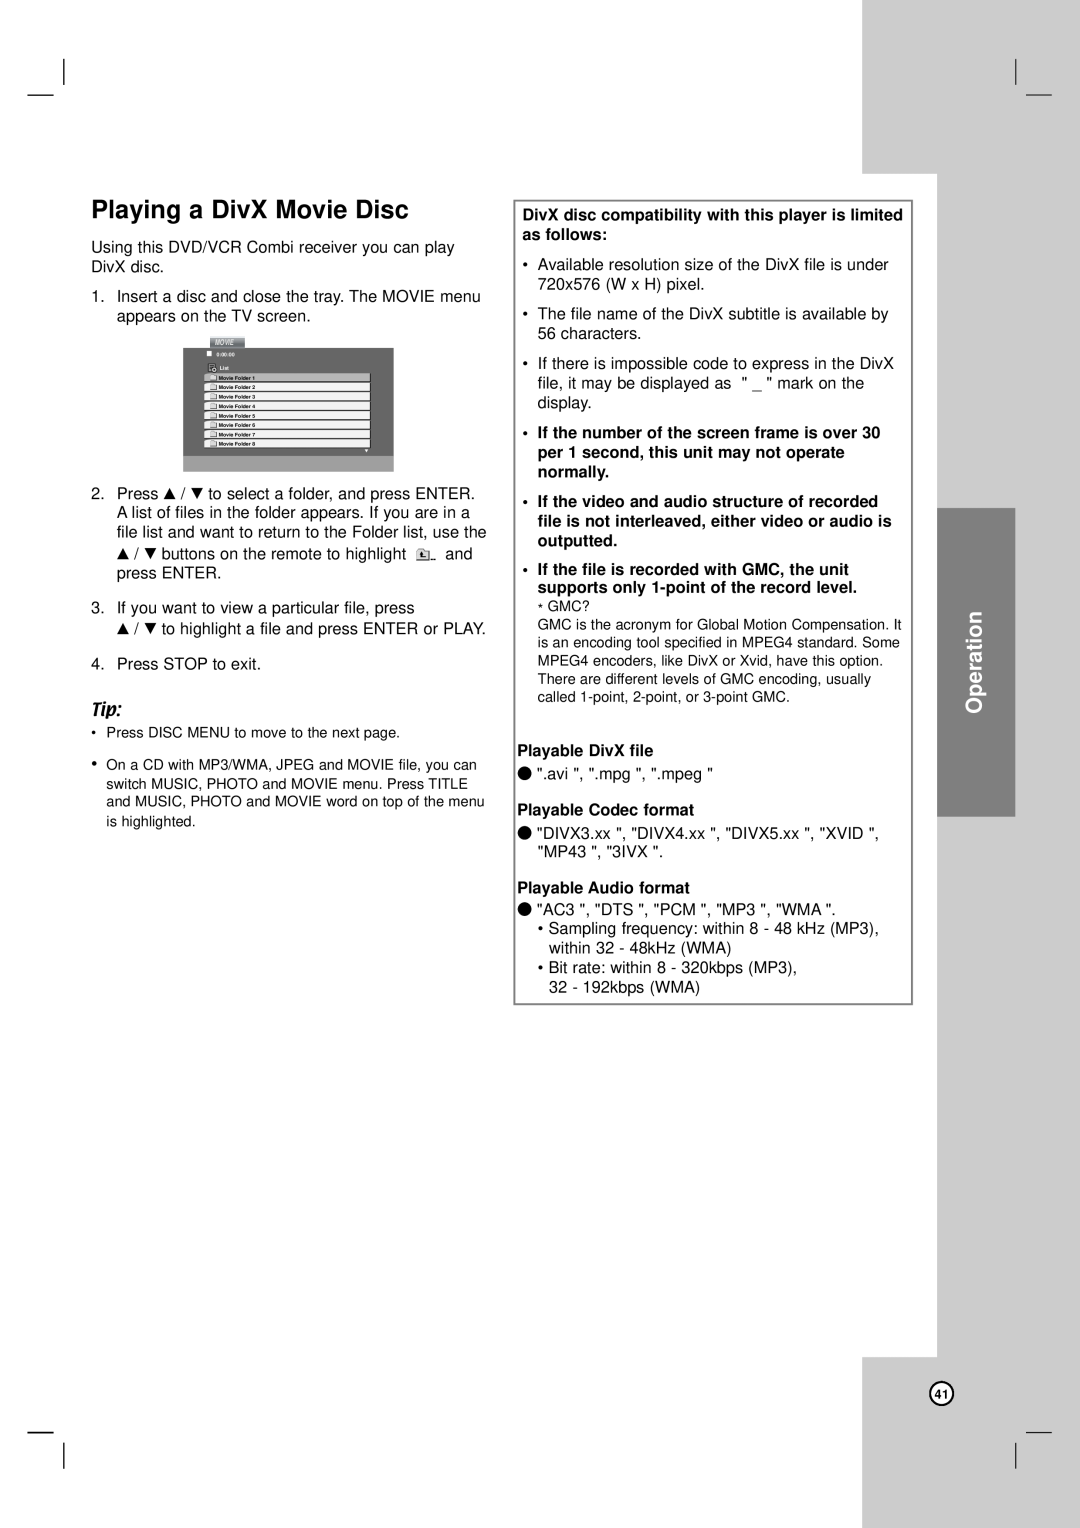 LG Electronics LH-CX245 owner manual Playing a DivX Movie Disc, Operation, Playable DivX file, Playable Codec format 